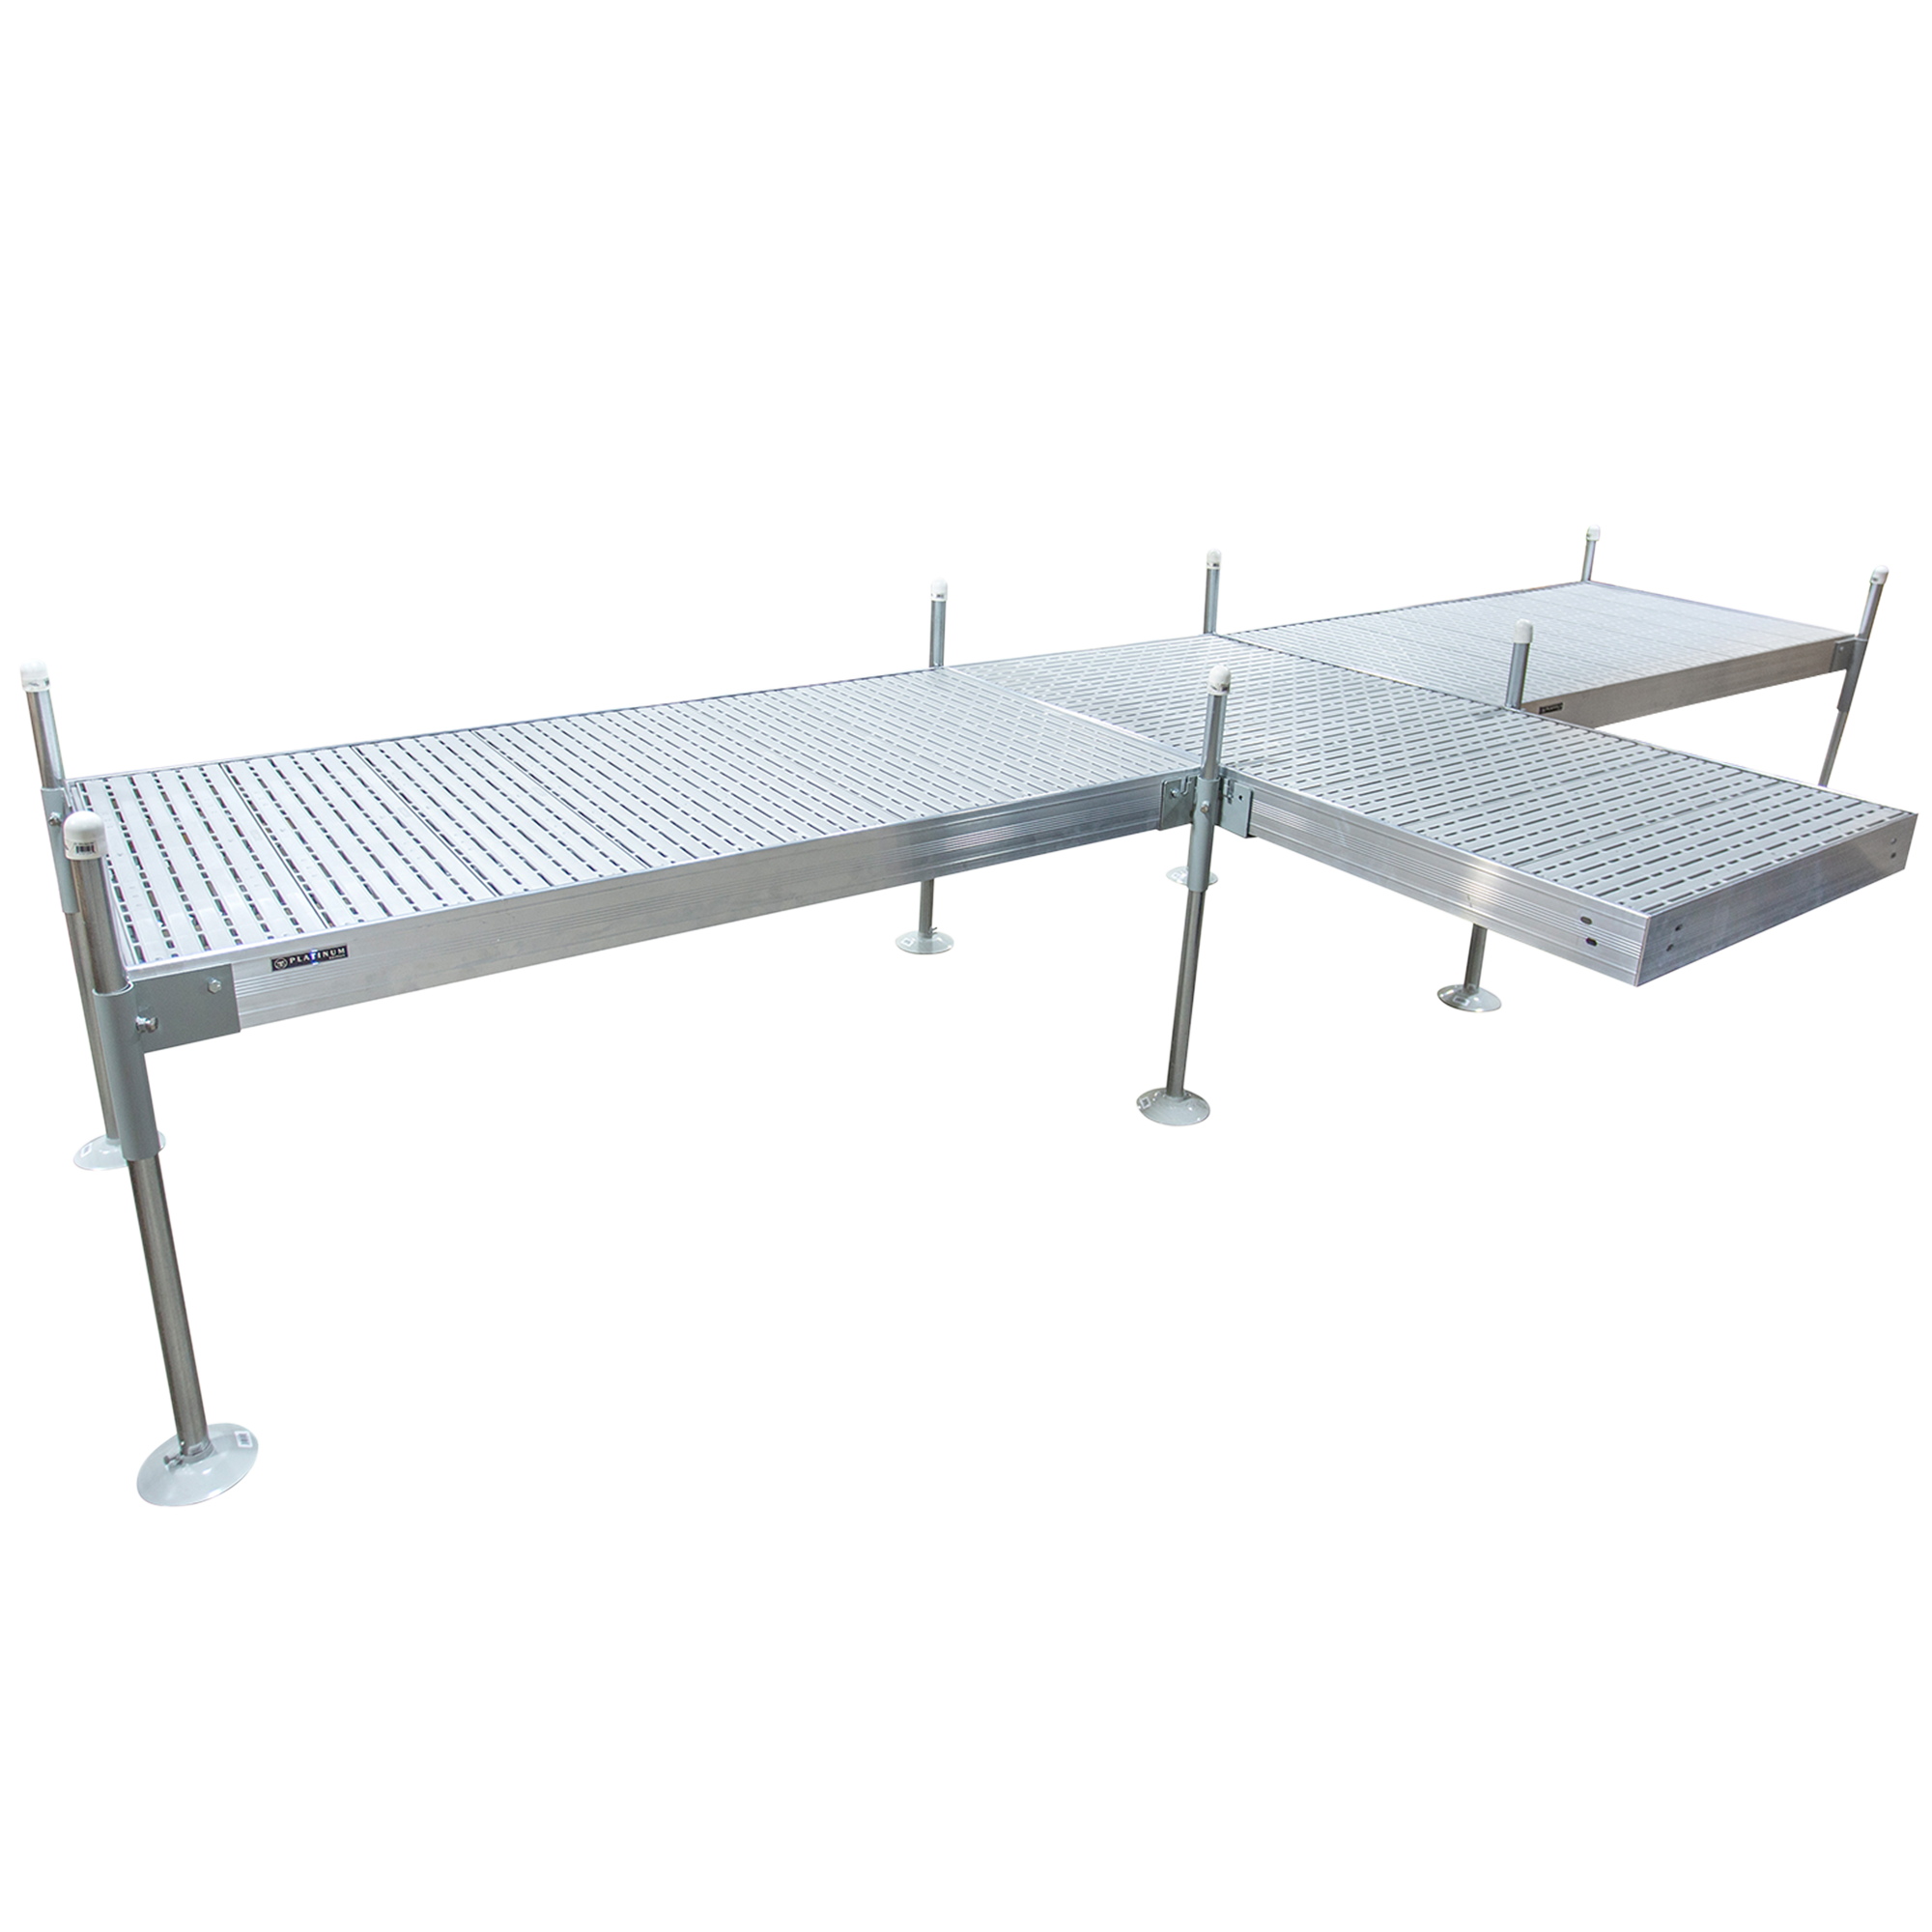 8' Shore T-Shaped Boat Dock System with Aluminum Frame and Gray Titan Decking